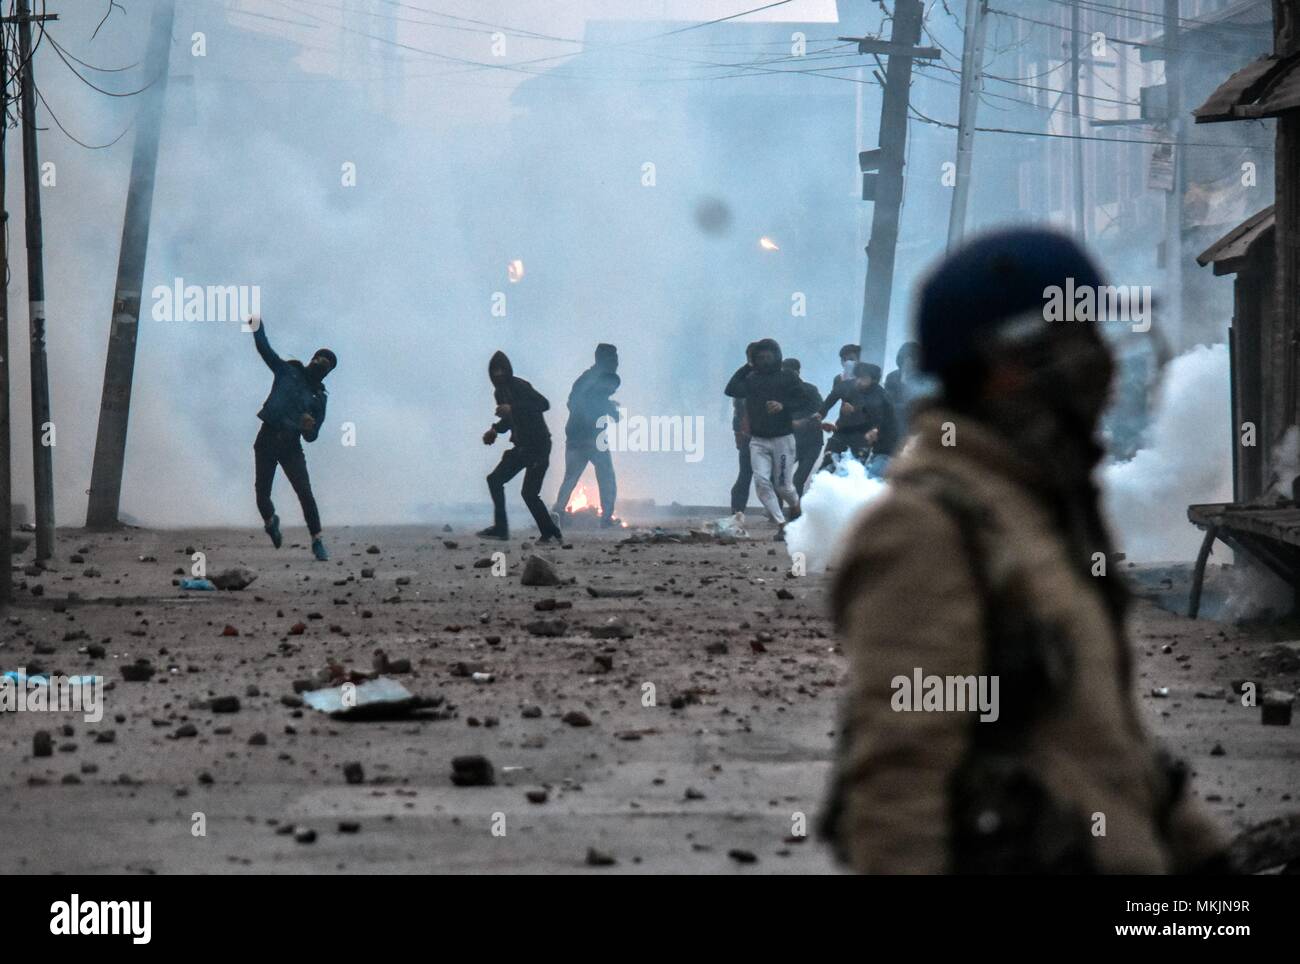 Srinagar, Kashmir. 8th May 2018. Kashmiri protesters throw stones amid tear smoke during clashes with government forces in Srinagar, Kashmir. Fierce clashes broke out between government forces and Kashmiri protesters in Srinagar on Tuesday as the valley continued to remain tense over the killing of 11 people including 5 militants and 6 civilians in Kashmir. Police used tear smoke shells and shot gun pellets to disperse hundreds of demonstrators who hurled rocks and chanted anti-and pro-freedom slogans. Credit: SOPA Images Limited/Alamy Live News Stock Photo